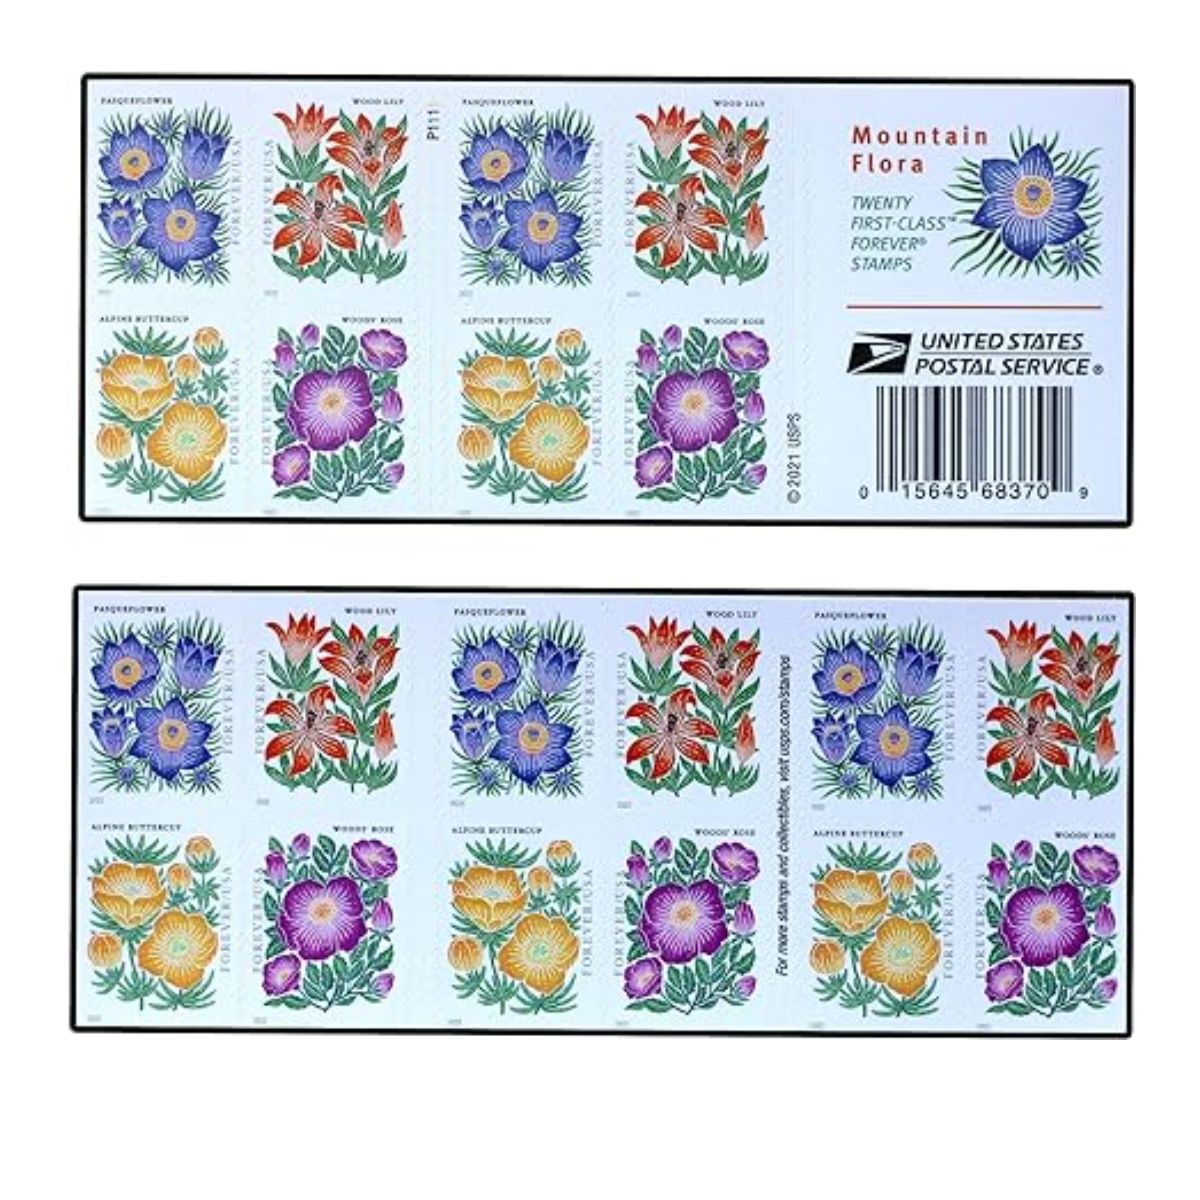 Beautiful Mountain Floral Flower Postage Stamps